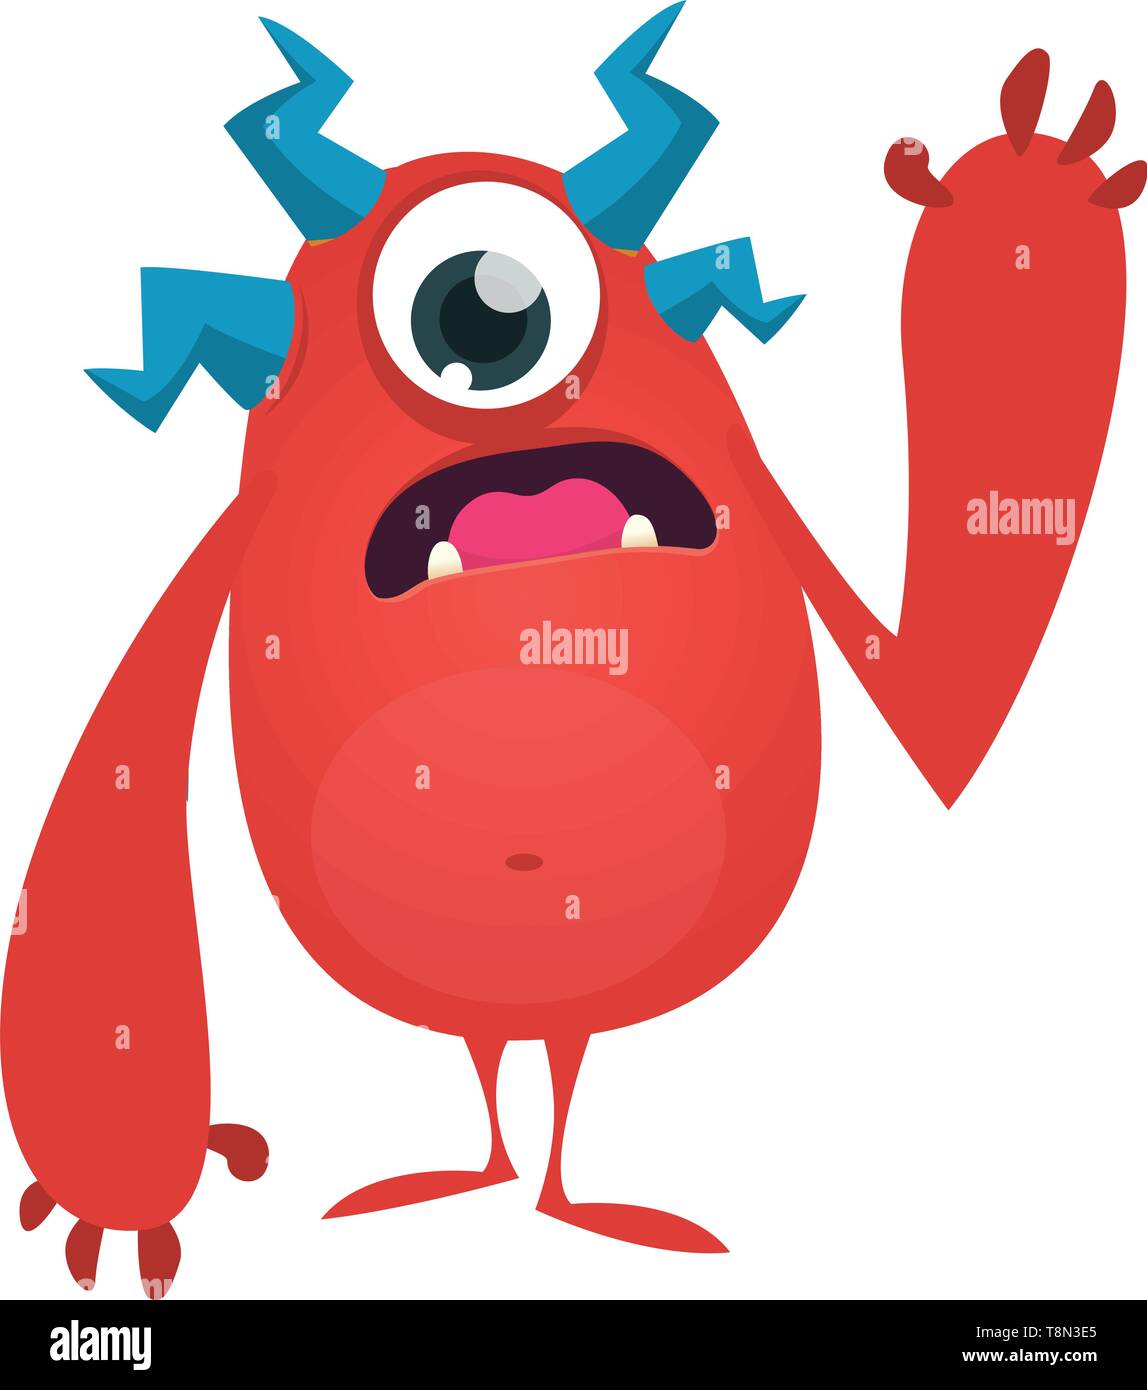 Cute cartoon monster with one eye. Vector Halloween illustration of funny red  monster character Stock Vector